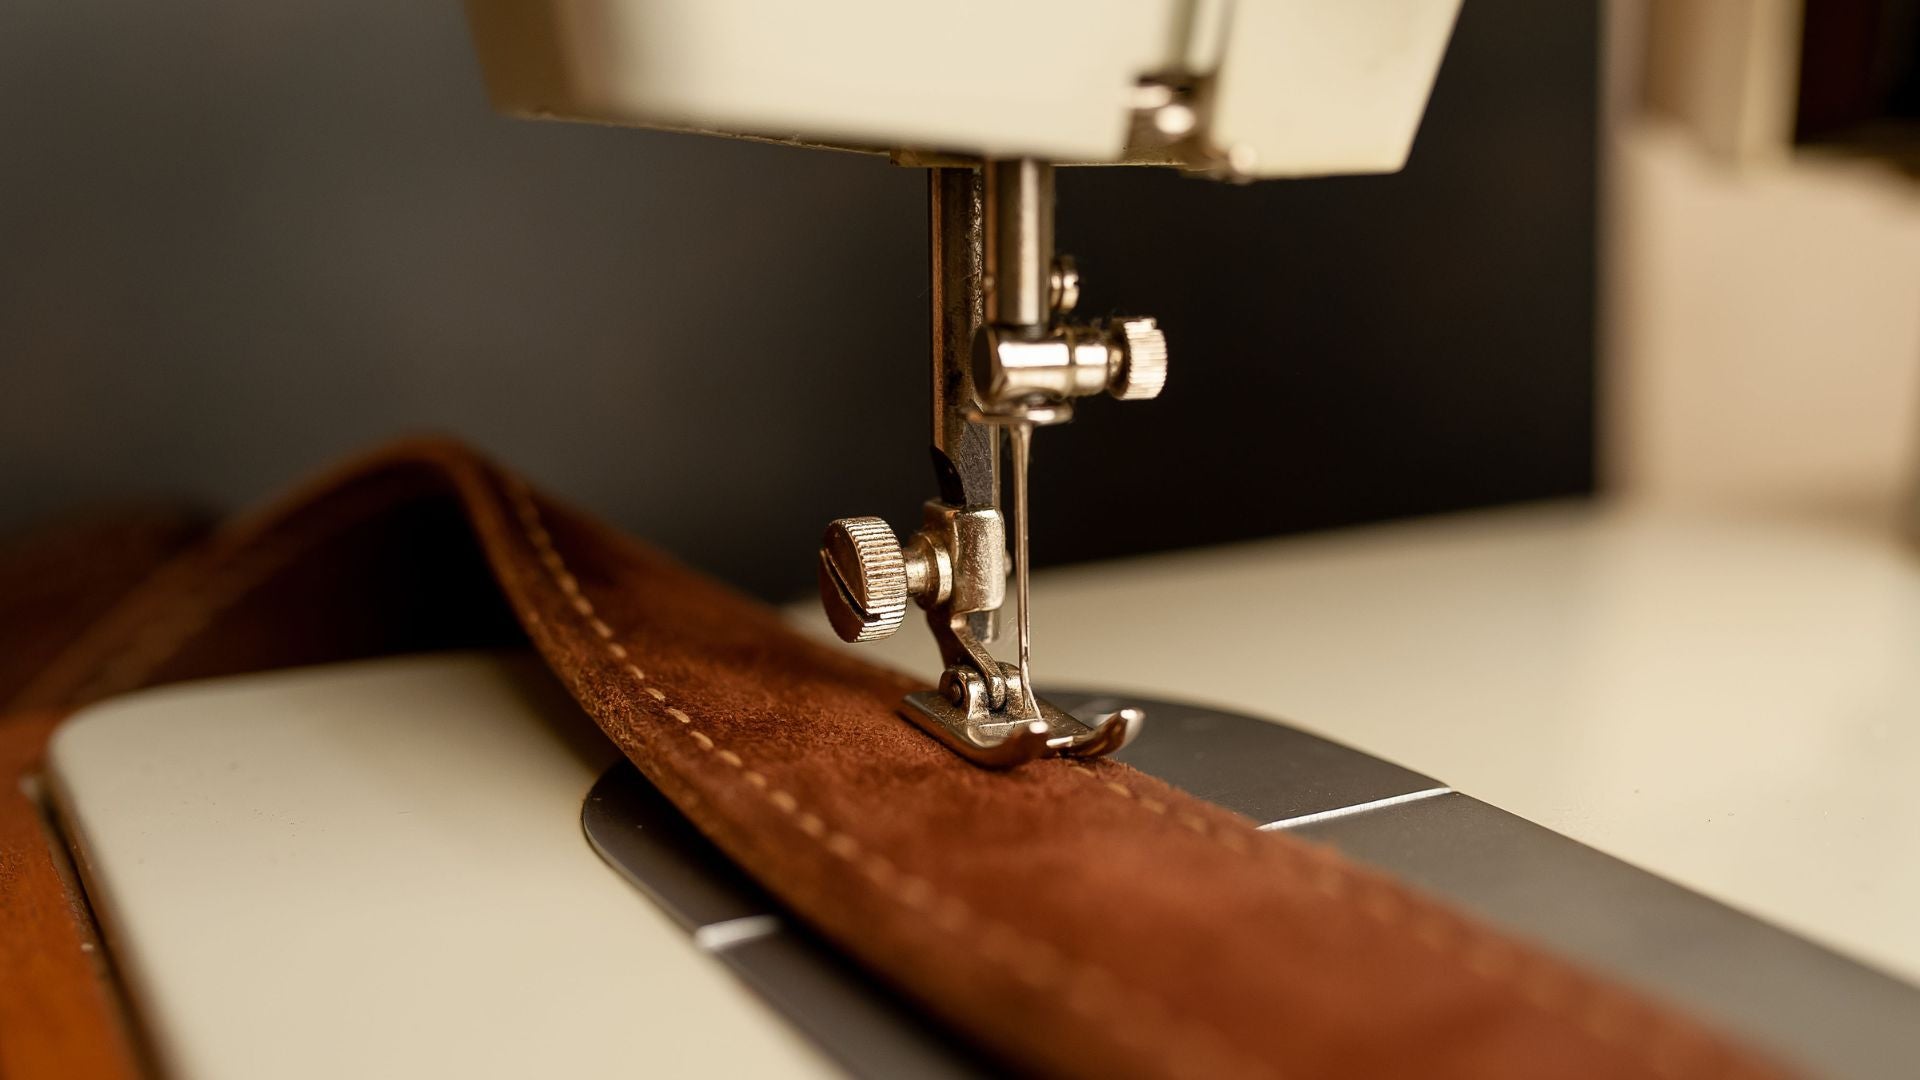 Recommendation: Why choose handmade leather bags?